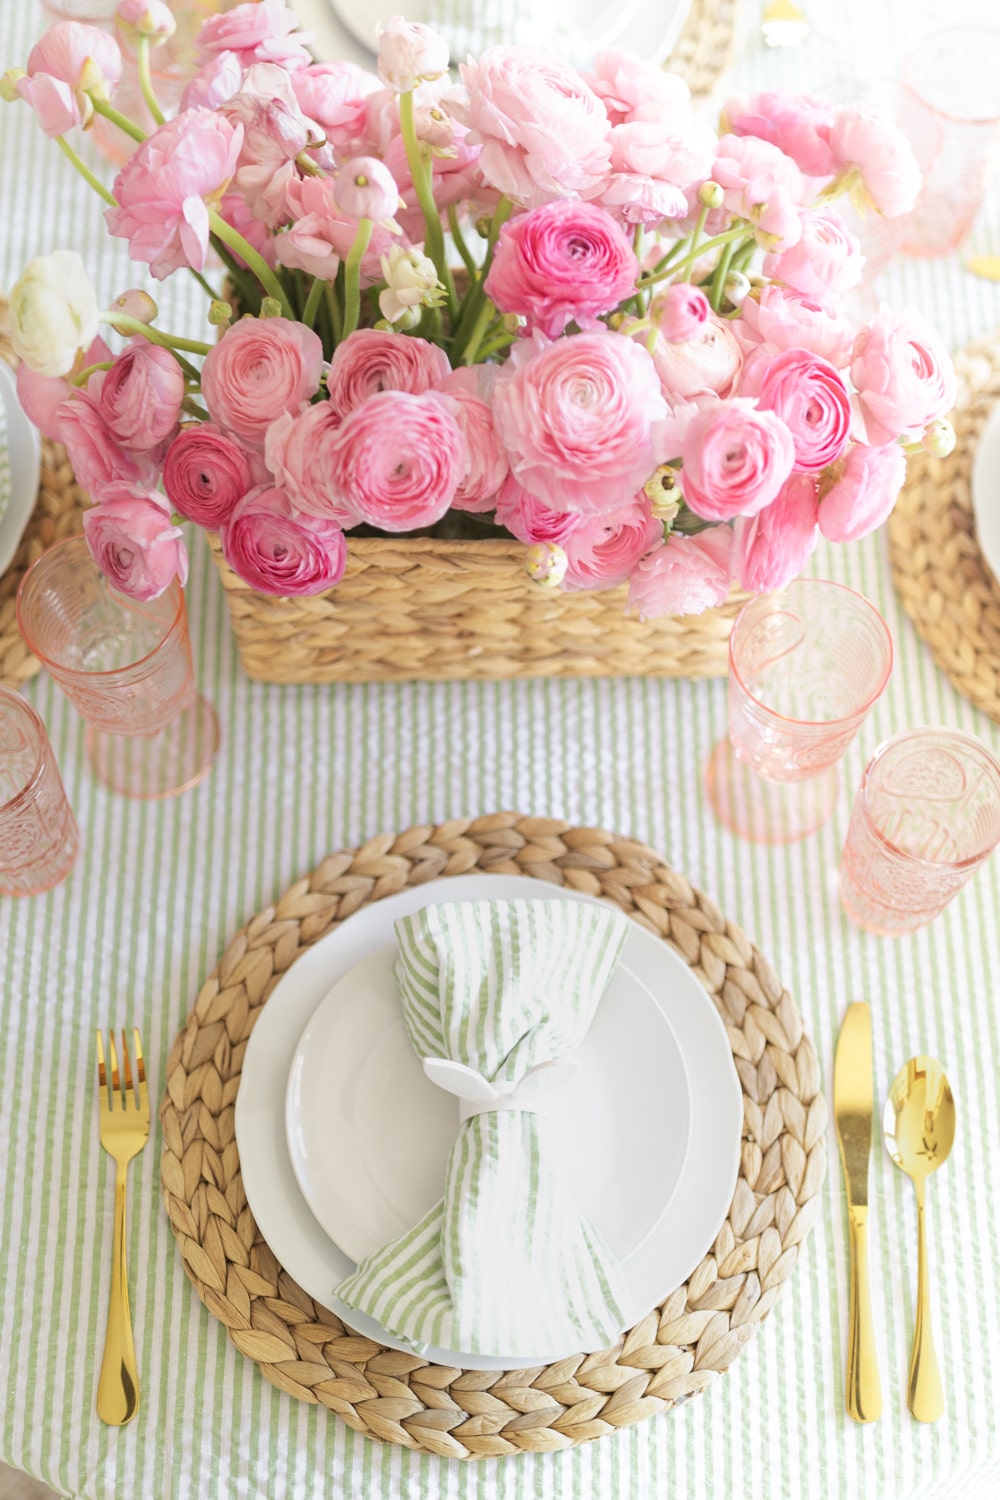 Easter dining table decor ideas from blogger Stephanie Ziajka on Diary of a Debutante